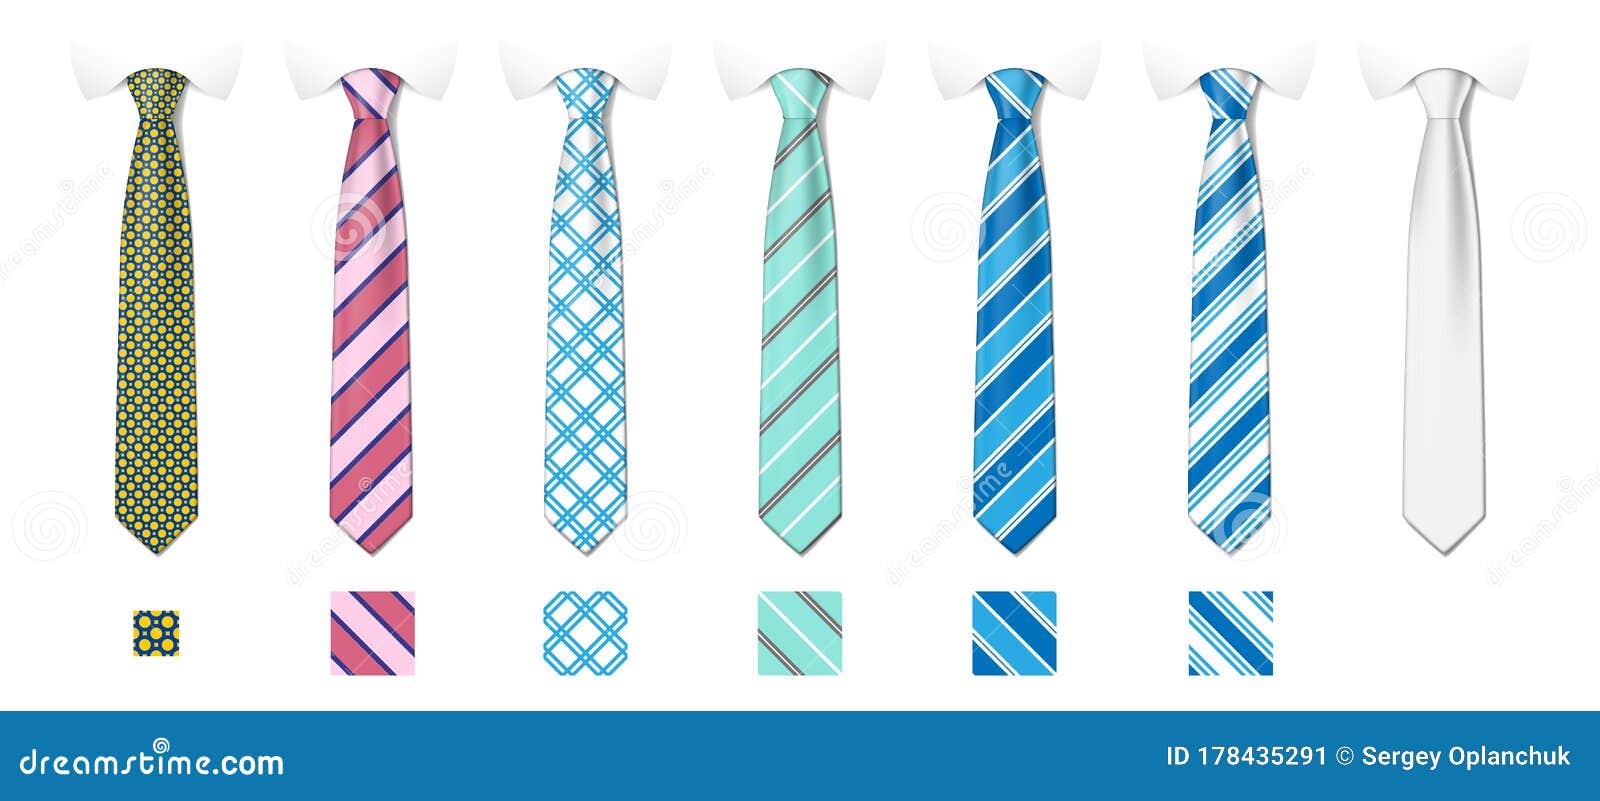 Download Striped Silk Neckties Templates With Textures Set Man Colored Tie Set Tie Mockup With Different Fashion Pattern Stock Vector Illustration Of Male Business 178435291